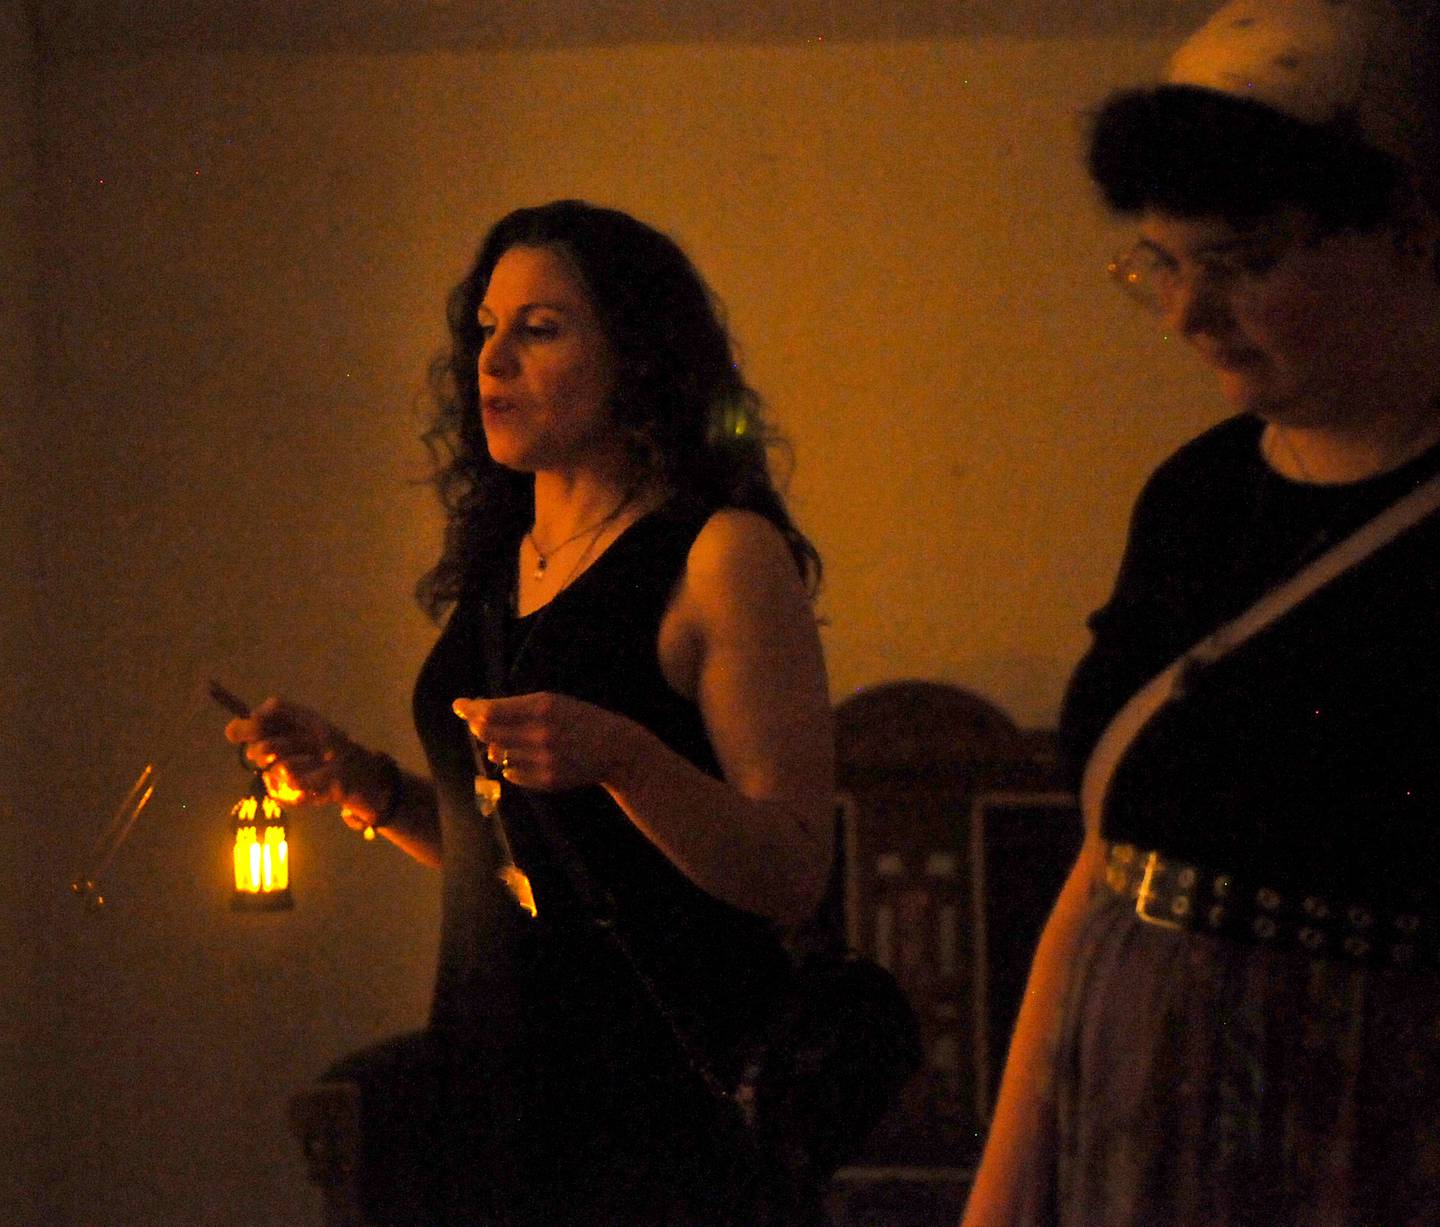 Lauren Purcell on the left is leading a paranormal tour in a doll mansion on Country Club Road 401 in Crystal Lake on Saturday, June 11, 2022. Purcell began offering tours at his mansion this spring. She will guide you through the third floor of her original building and provide a historic anecdote through the lens of a spiritual visit while guests use pendulum crystals and dowsing rods as part of a tour to experience the visit.